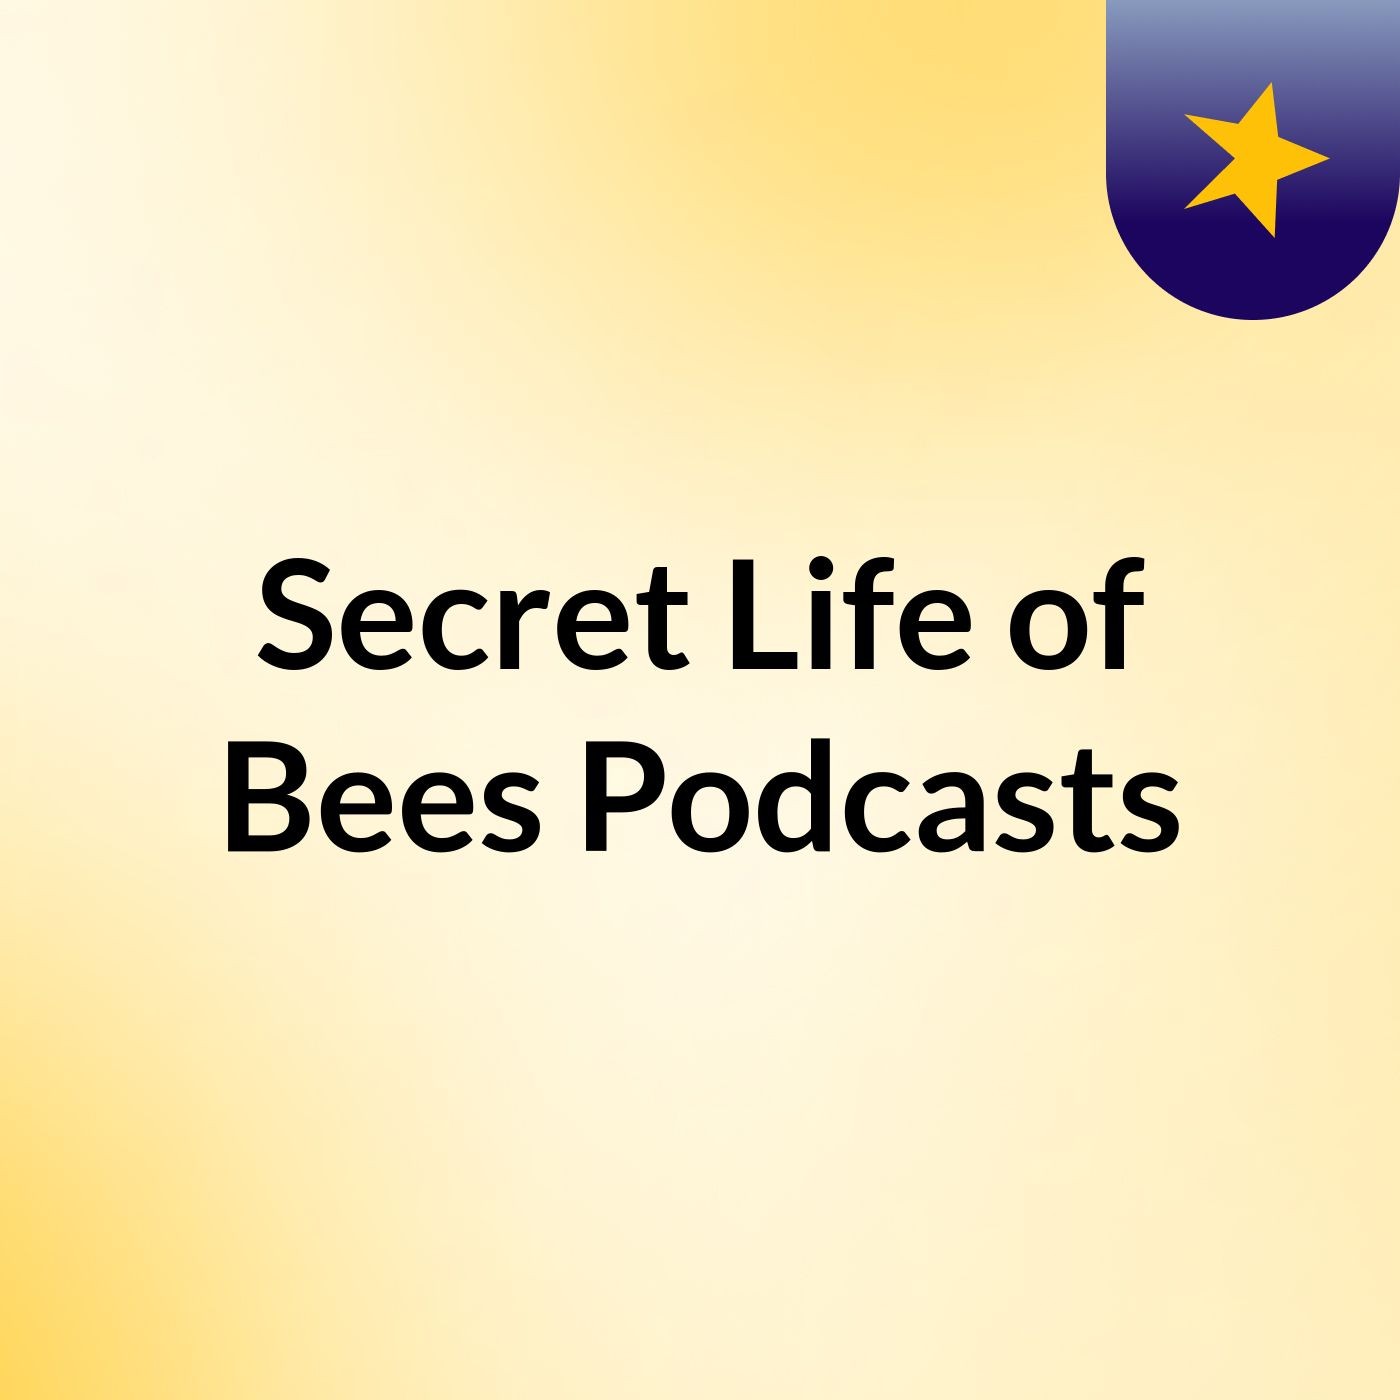 Secret Life of Bees Podcasts